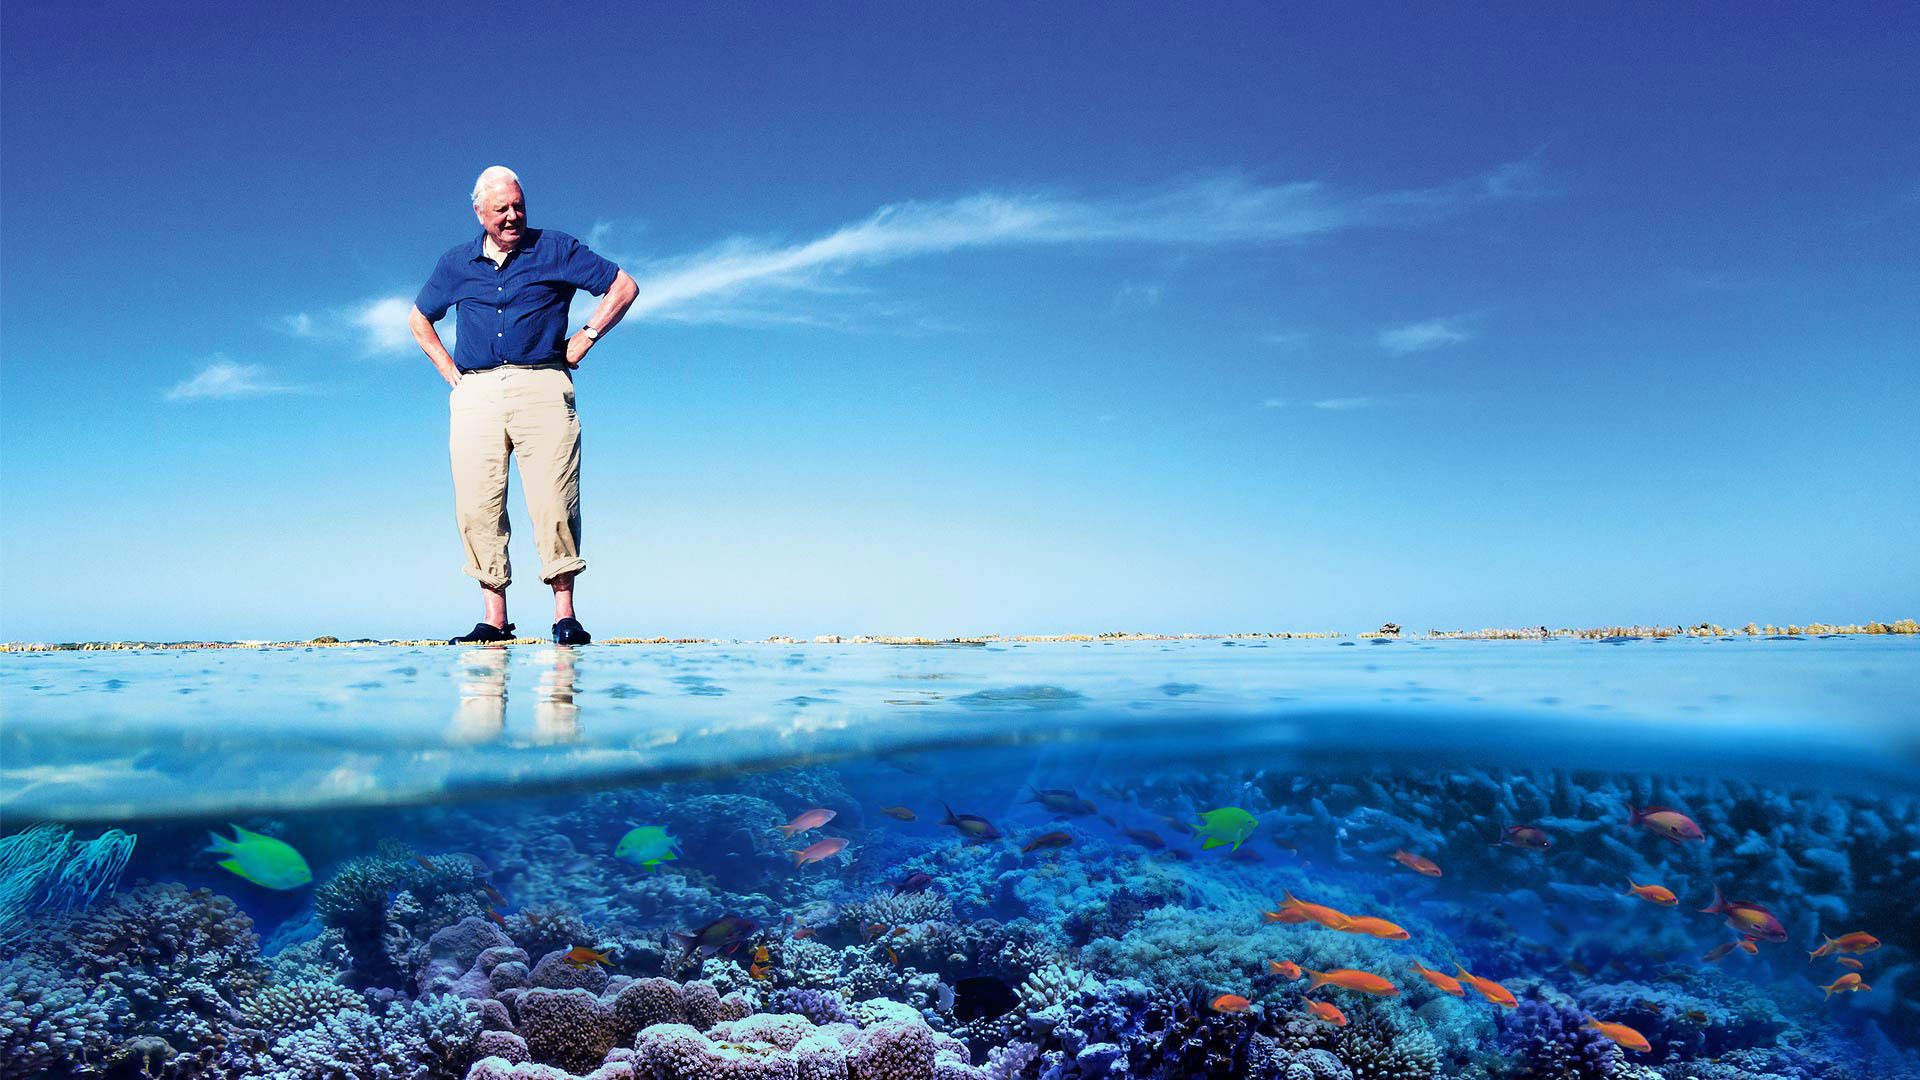 Take a Virtual Tour of the Great Barrier Reef